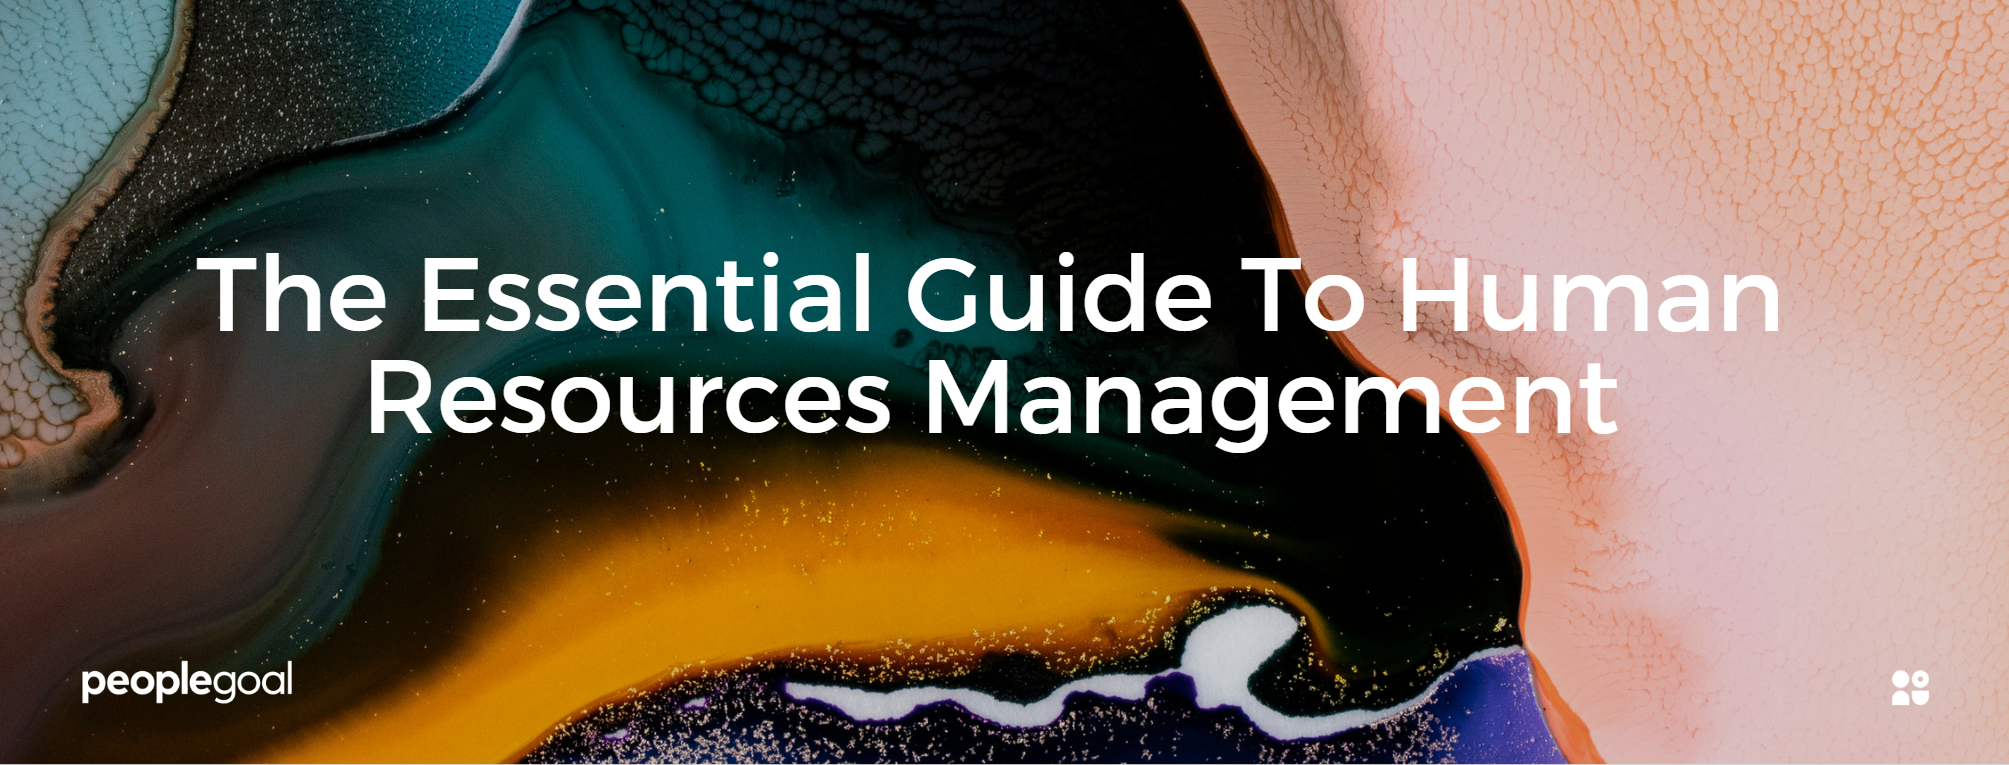 Human Resources Management history, best and worst practices, HRM process, handy examples and more to be found in this essential guide.